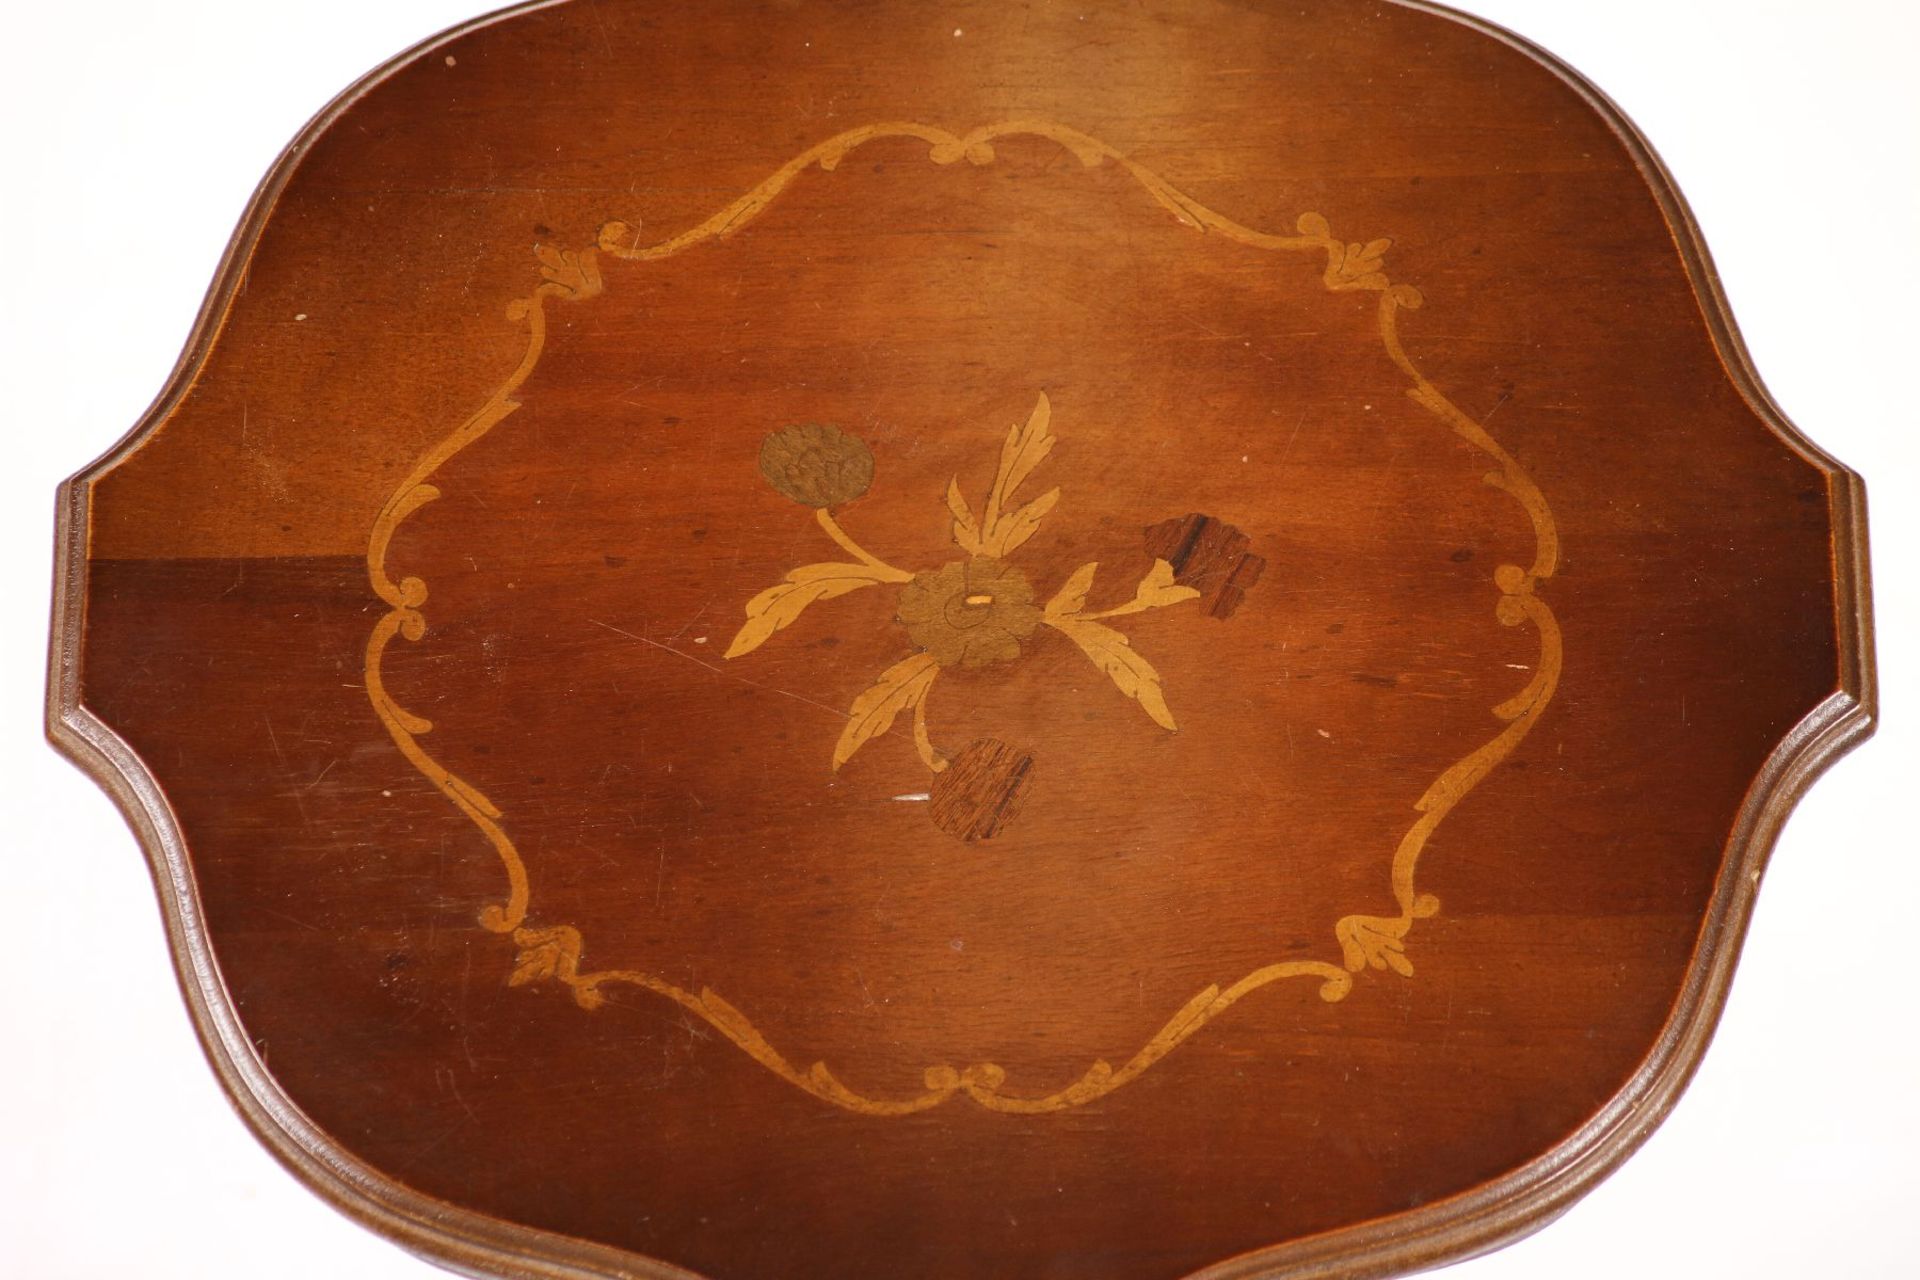 telephone table, partly solid wood, walnut veneer, inlays in shape of flowers and leafing using - Image 2 of 2